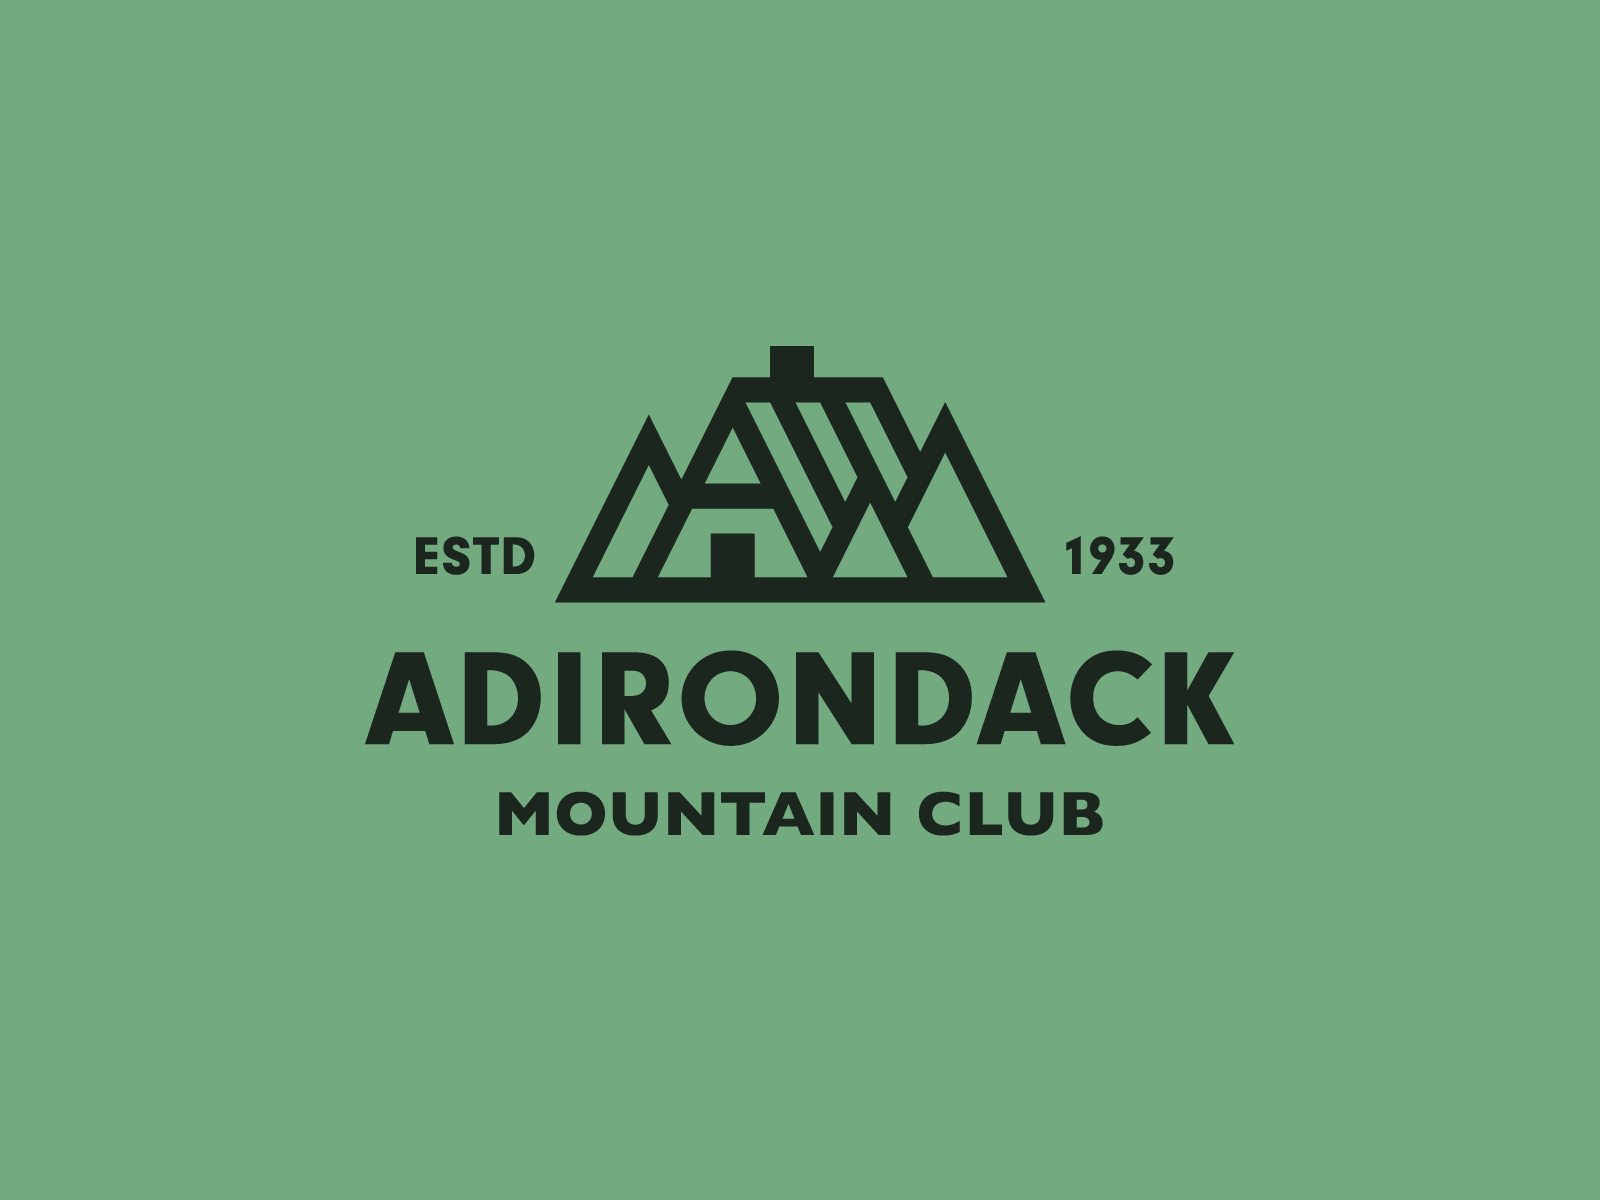 Adirondack Mountain Club woods forest cabin camping hiking branding adirondack mountain logo